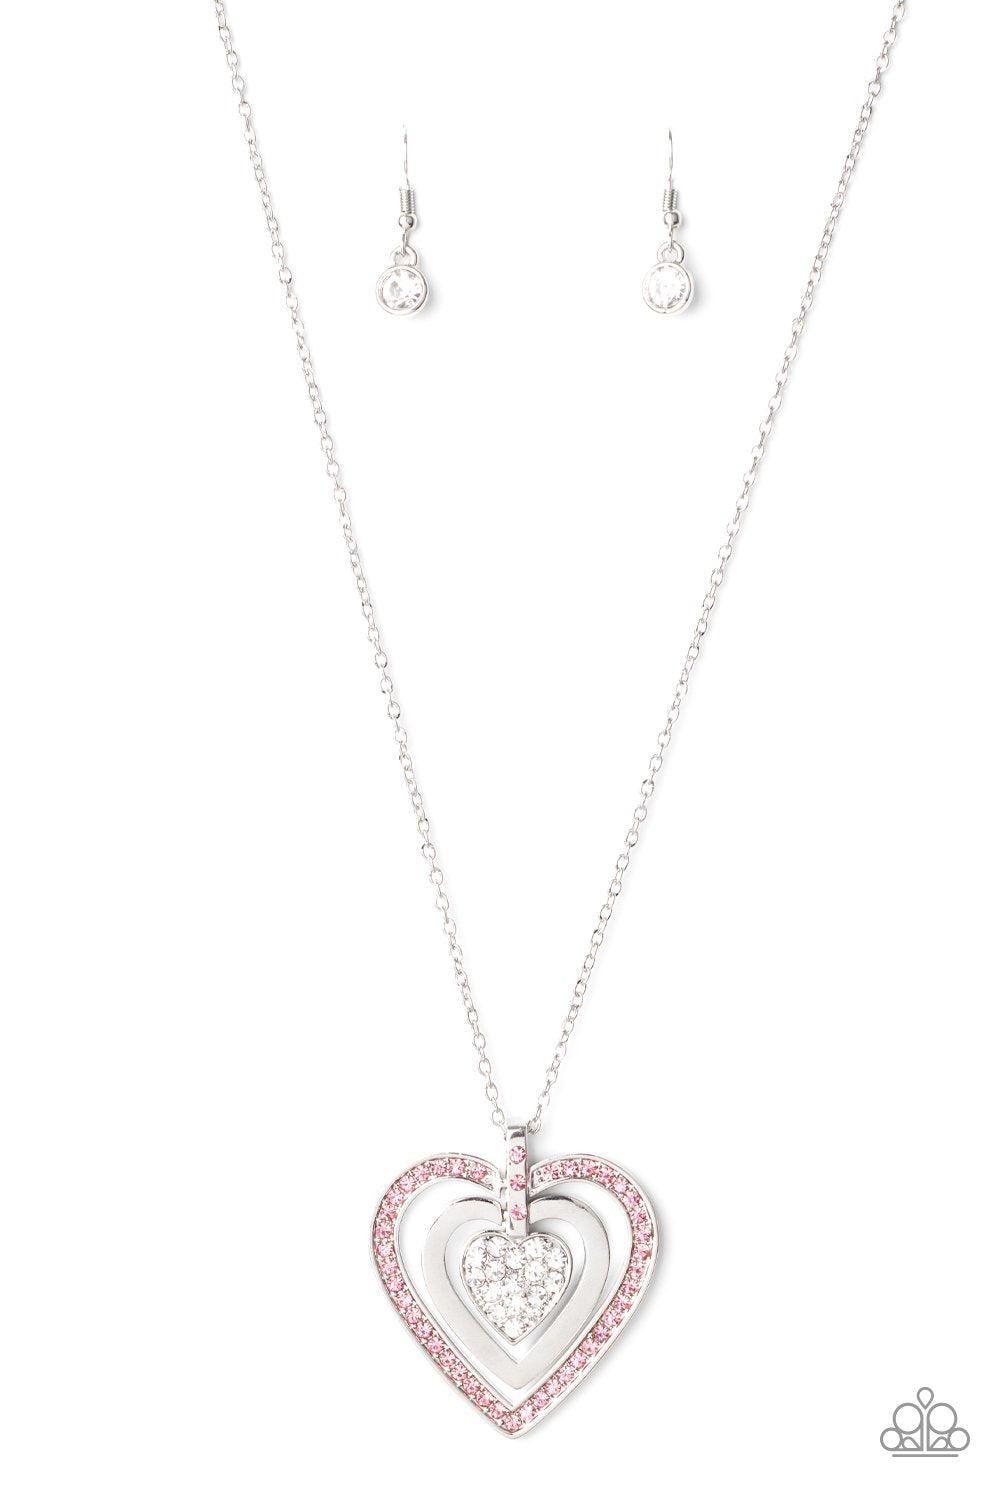 Bless Your Heart Pink and White Rhinestone Heart Necklace - Paparazzi Accessories - lightbox -CarasShop.com - $5 Jewelry by Cara Jewels